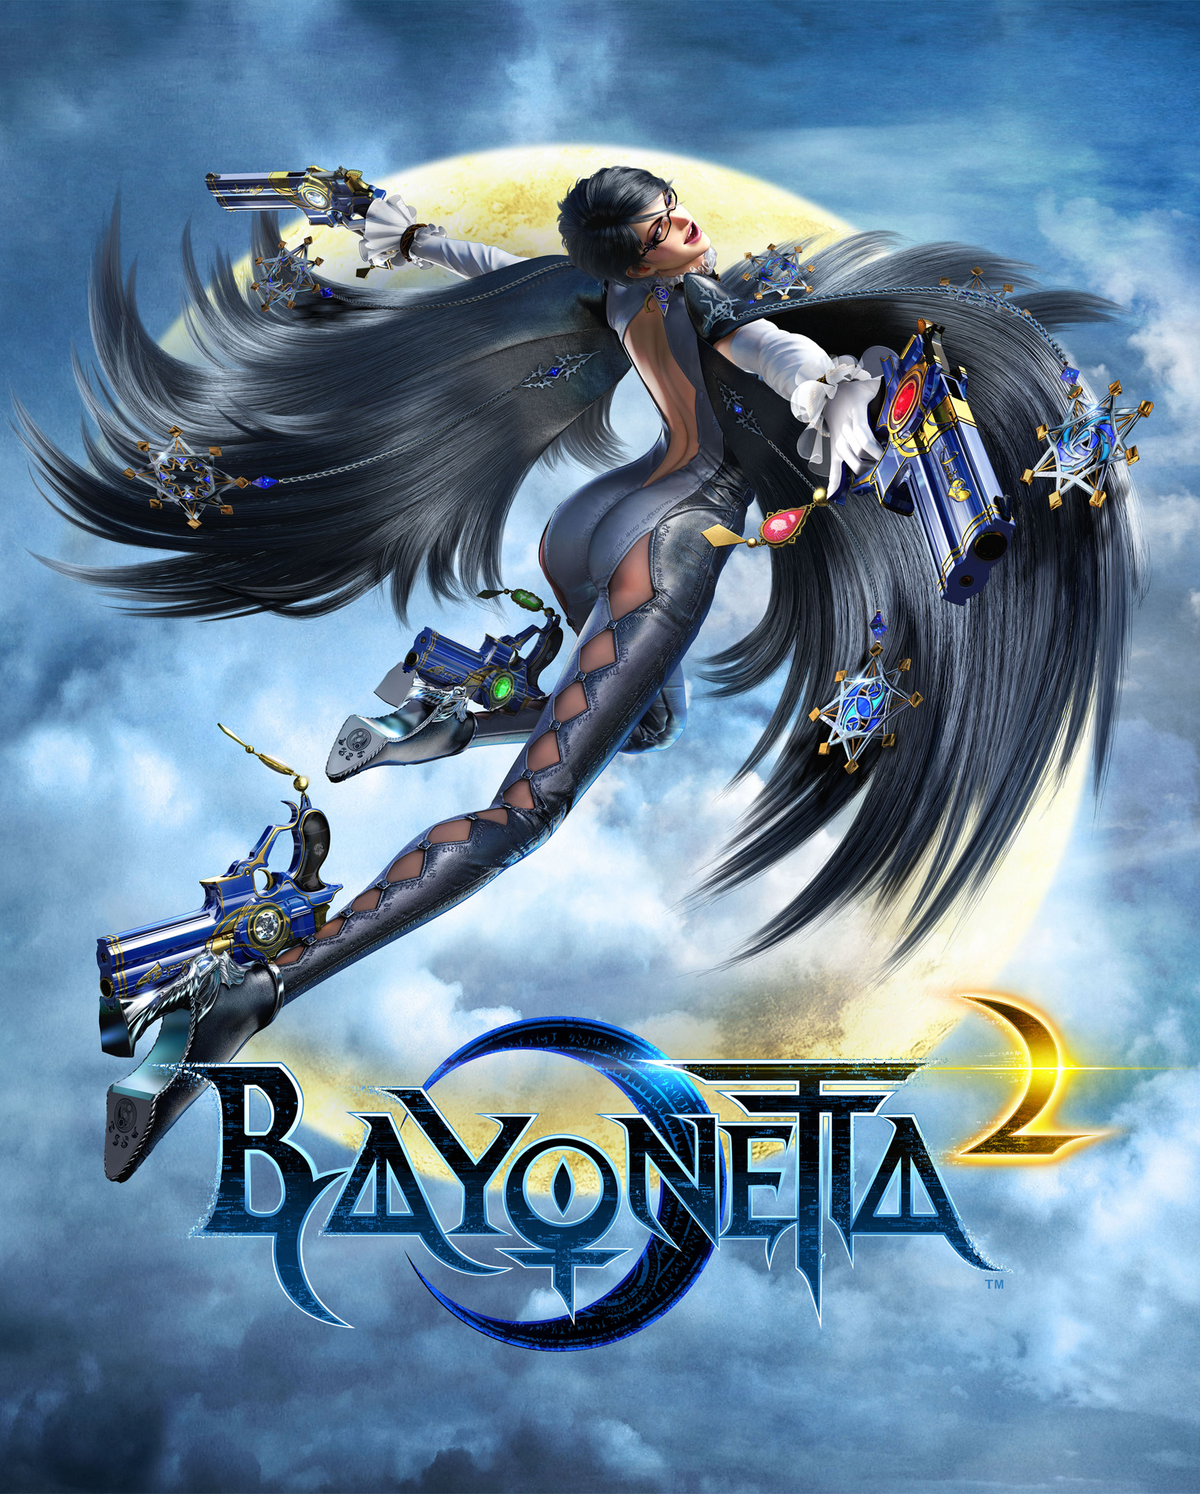 Hair today: Bayonetta 1 + 2: Switch Collection review